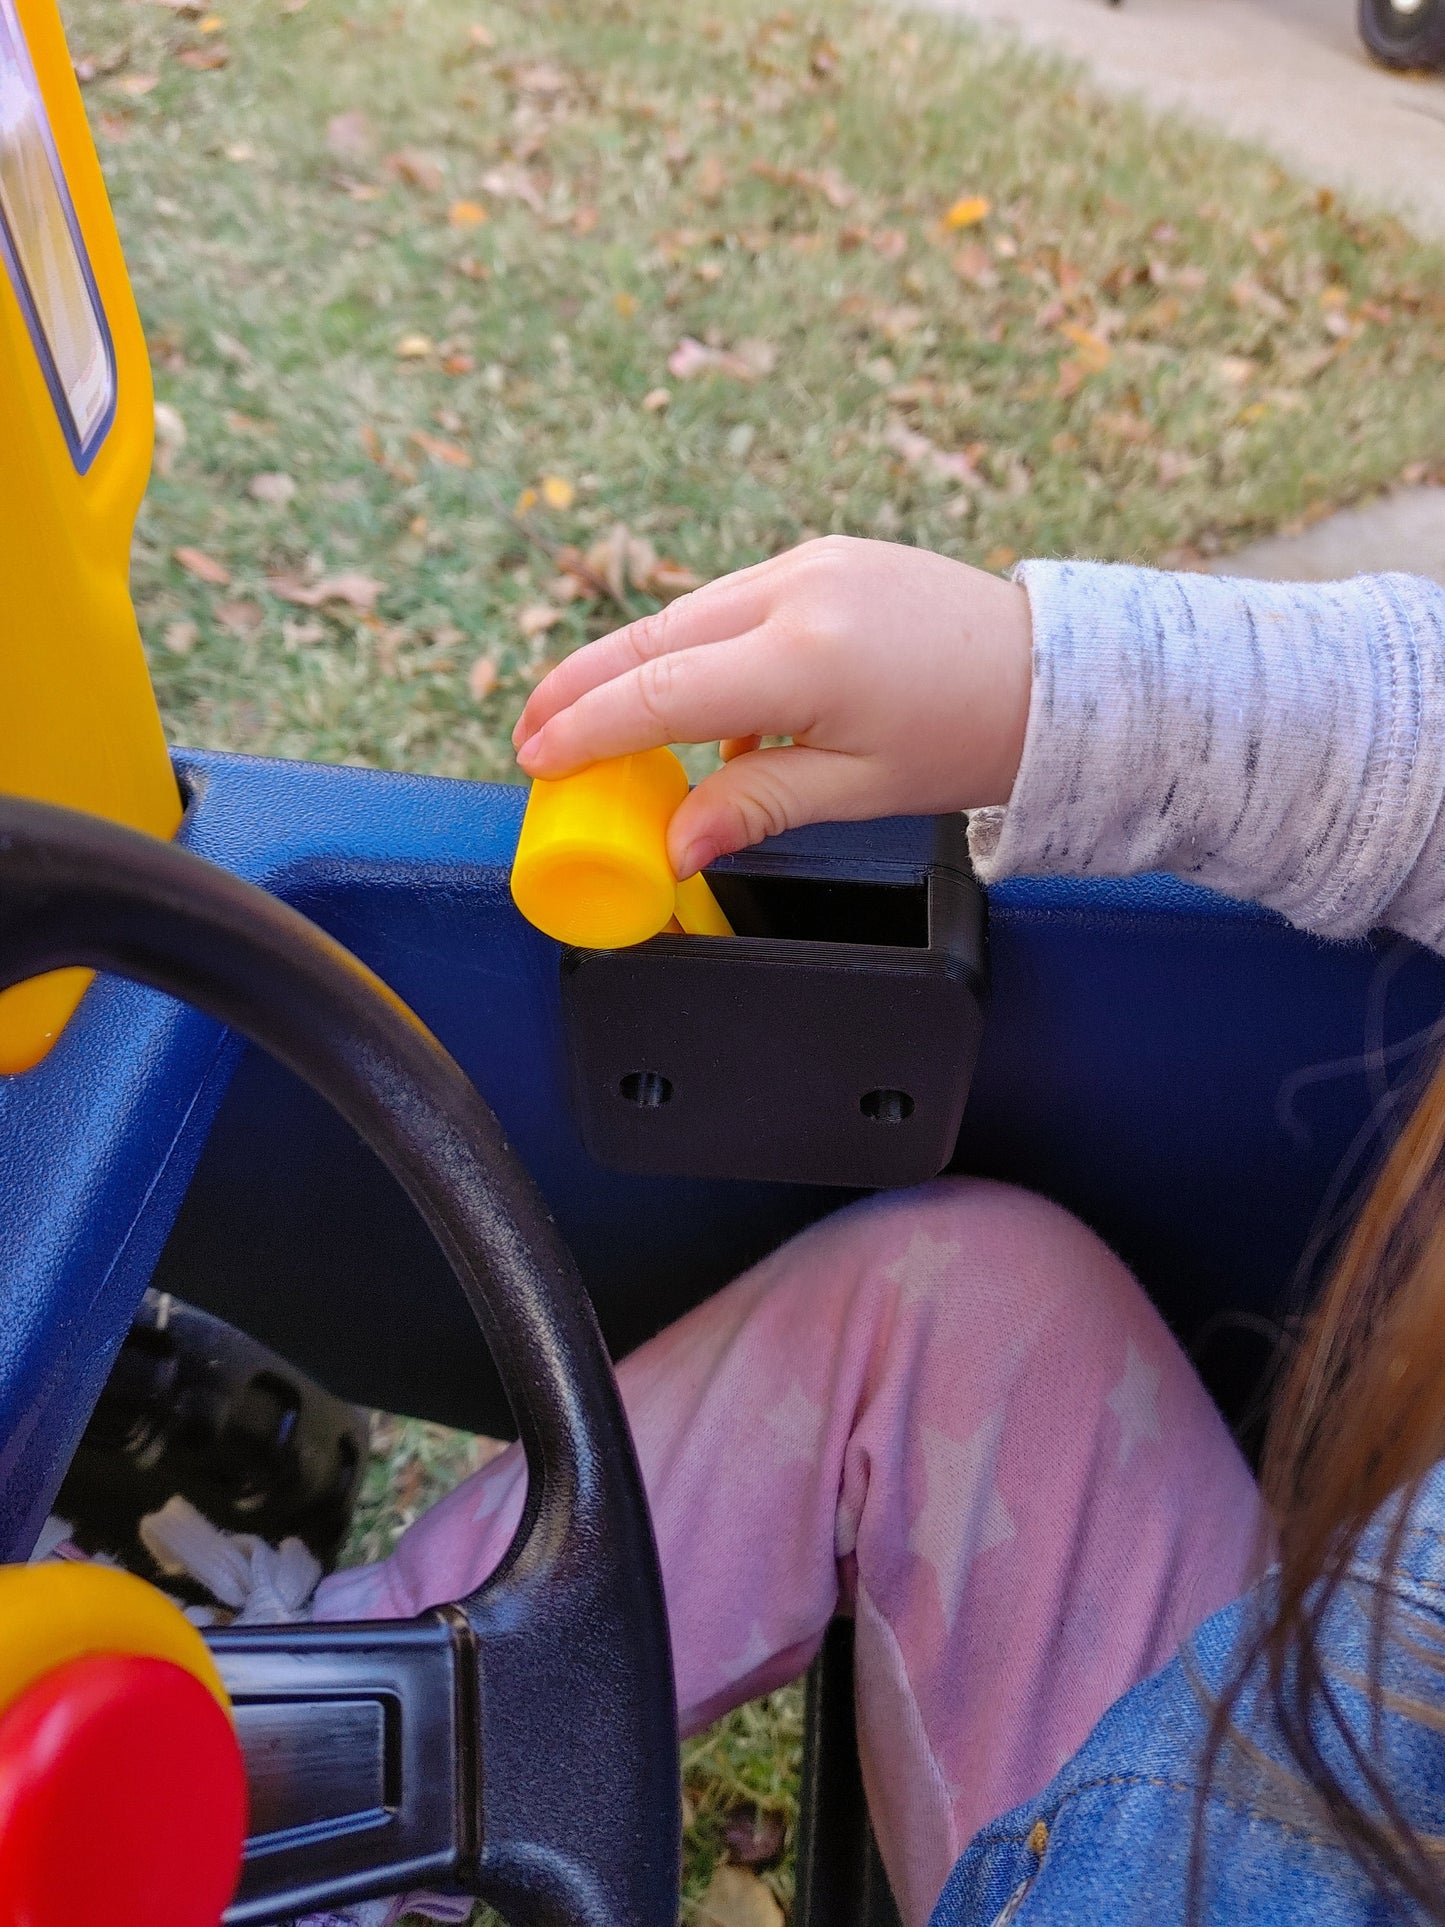 Throttle Lever/Gear Shifter Designed to be Compatible with the Little Tikes Cozy Truck and Cozy Coupe